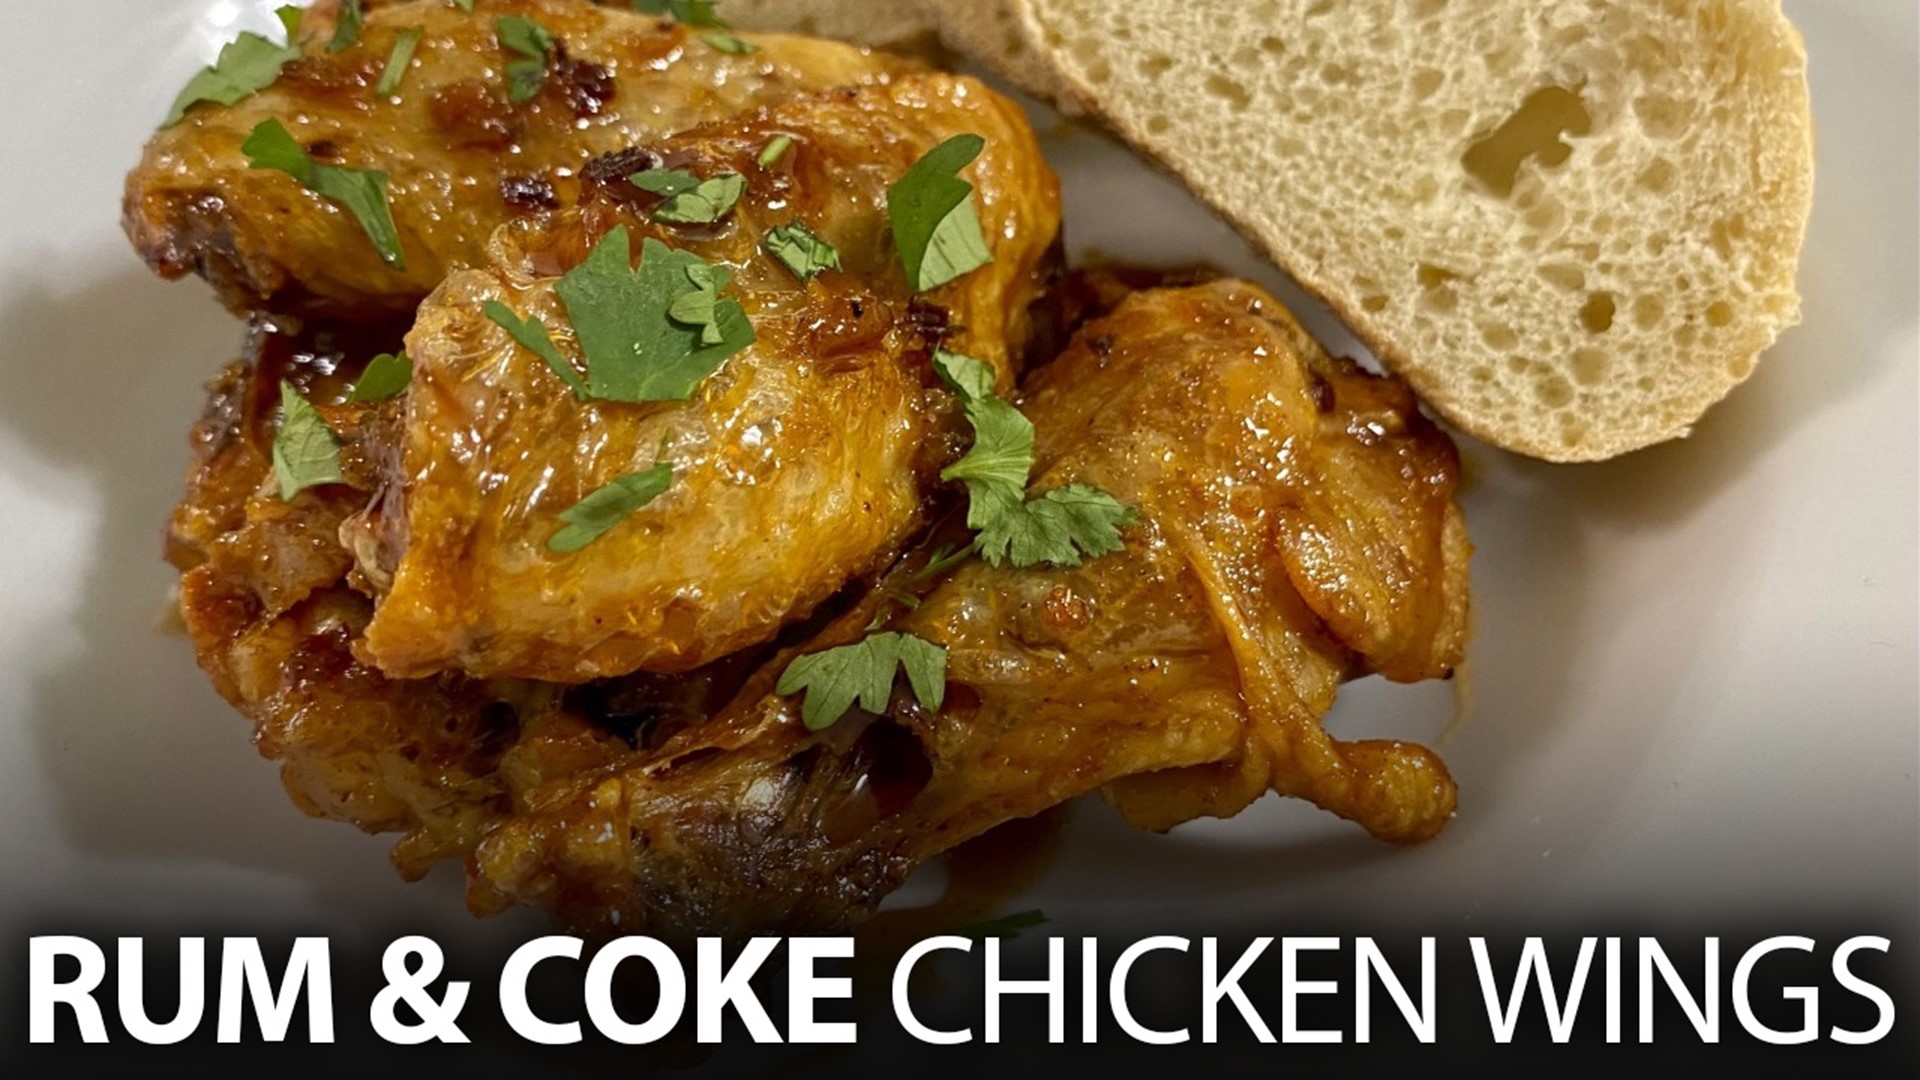 Who doesn't love wings? These Rum and Coke Wings are finger-licking DELICIOUS!